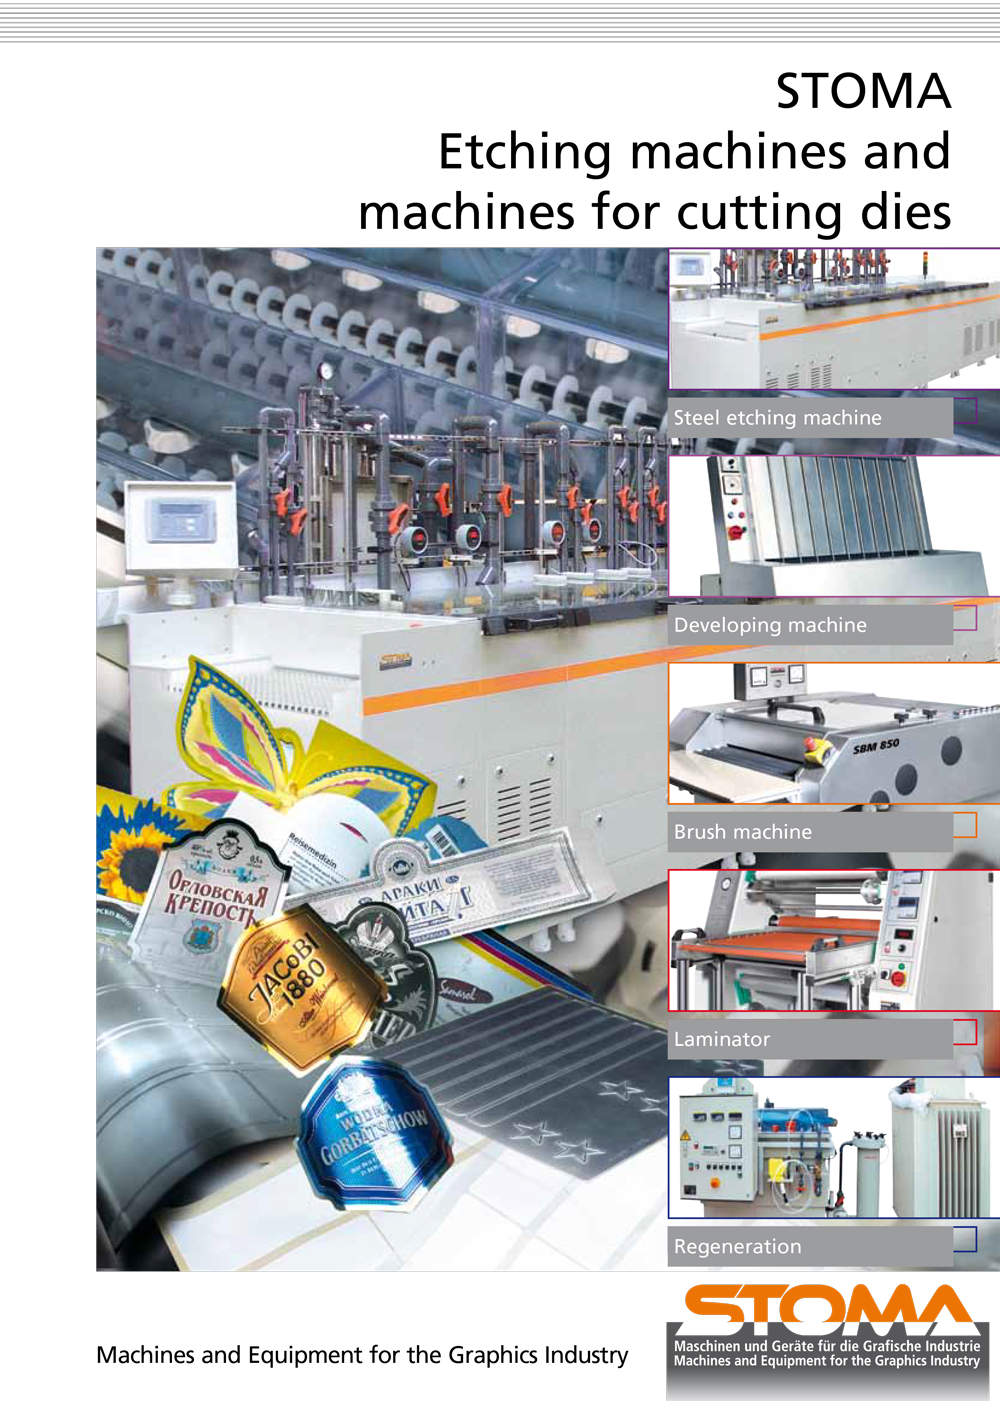 STOMA Etching machines and machines for cutting dies